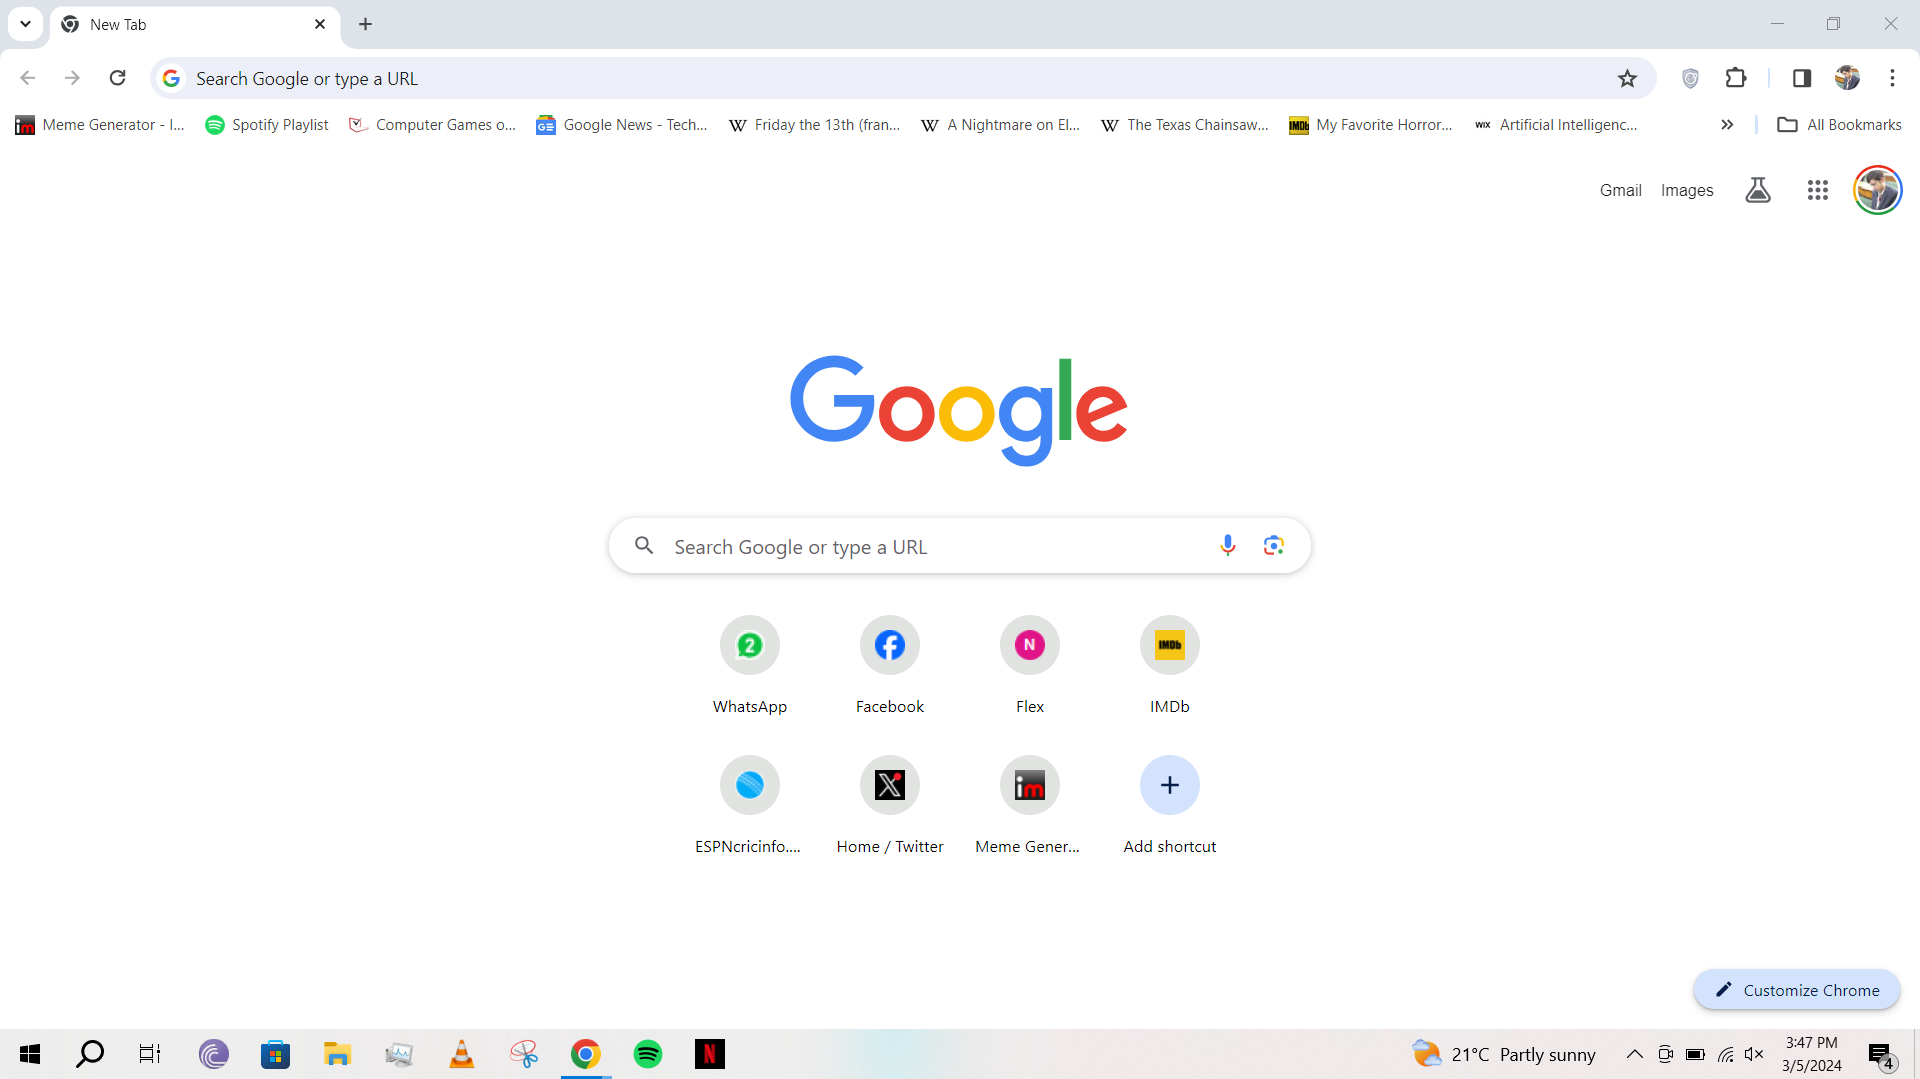 Google Search open in a new tab on Windows 10